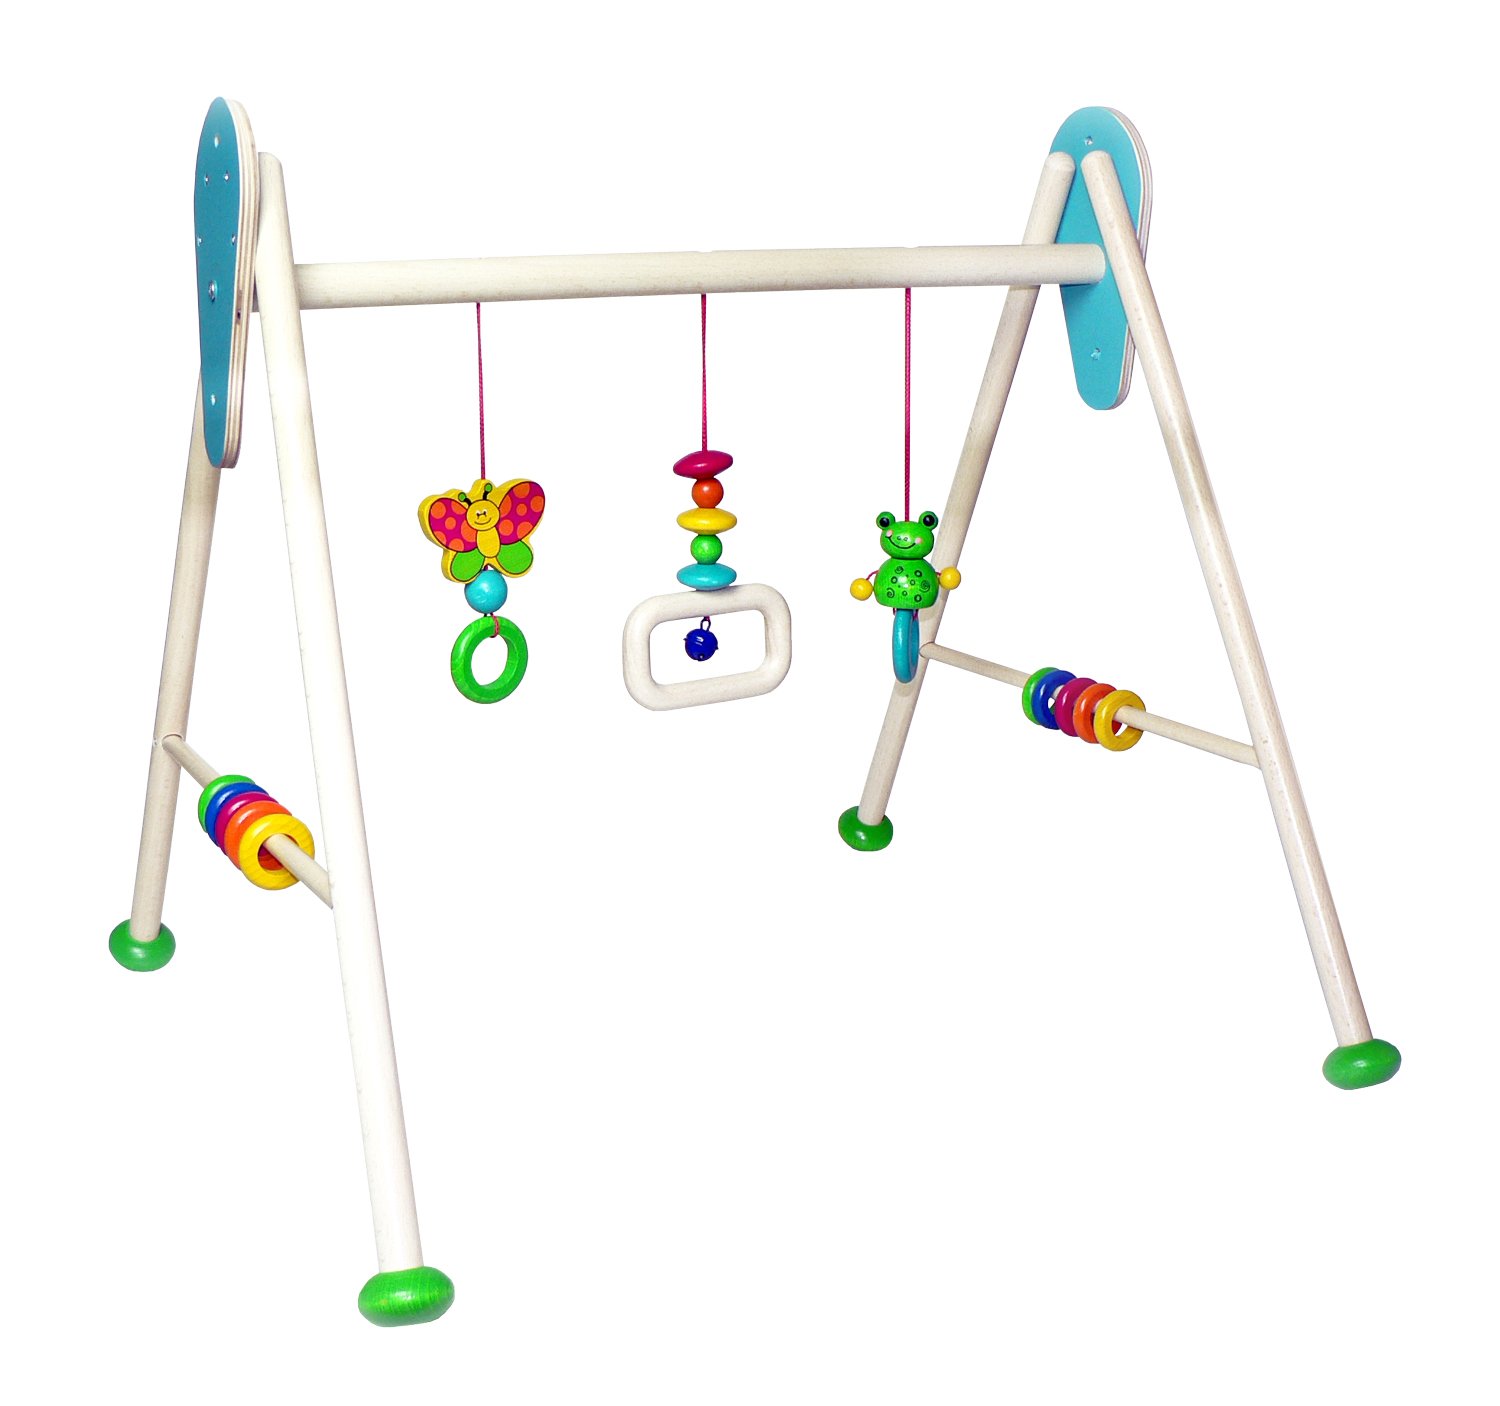 Hess Wooden Baby Toy 13372 [Toy, Frog, 62 x 55 x 50 cm